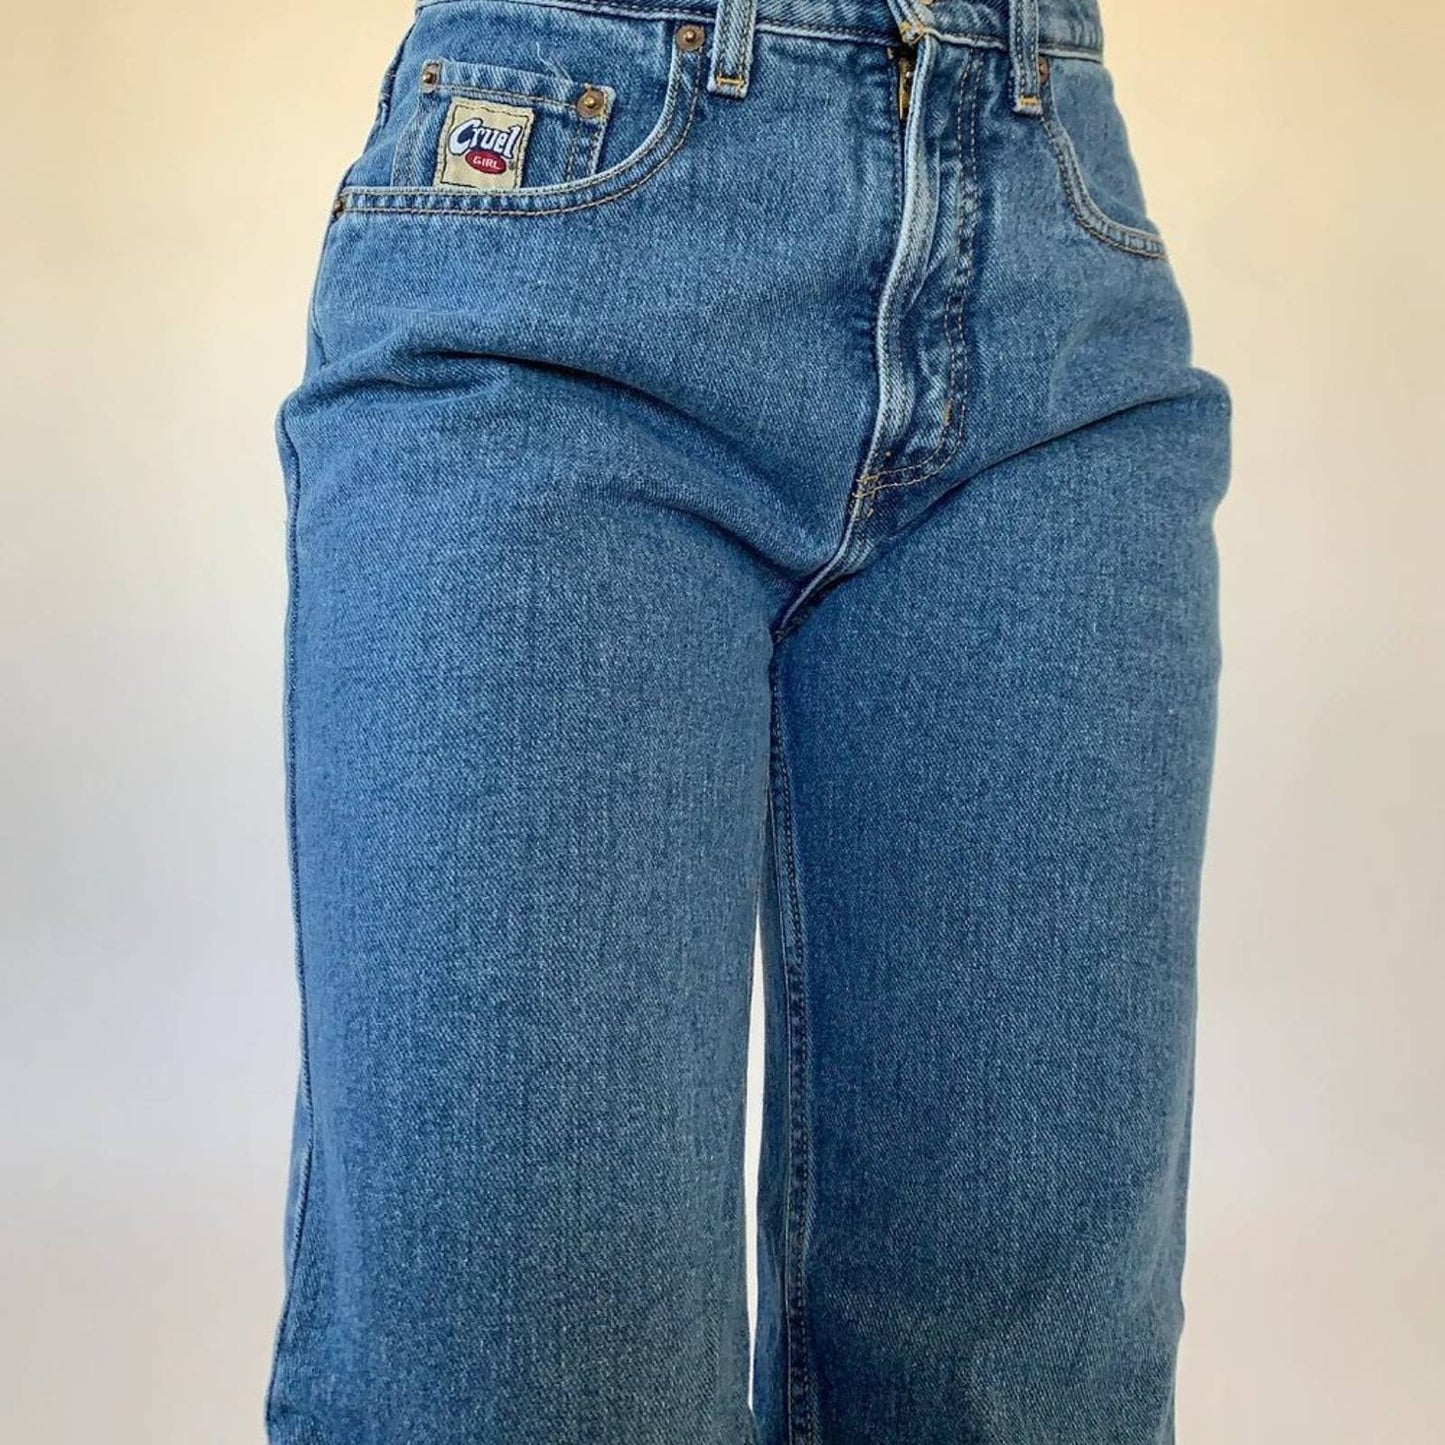 Vintage High Rise Mom Jeans by Cruel Girl - 9